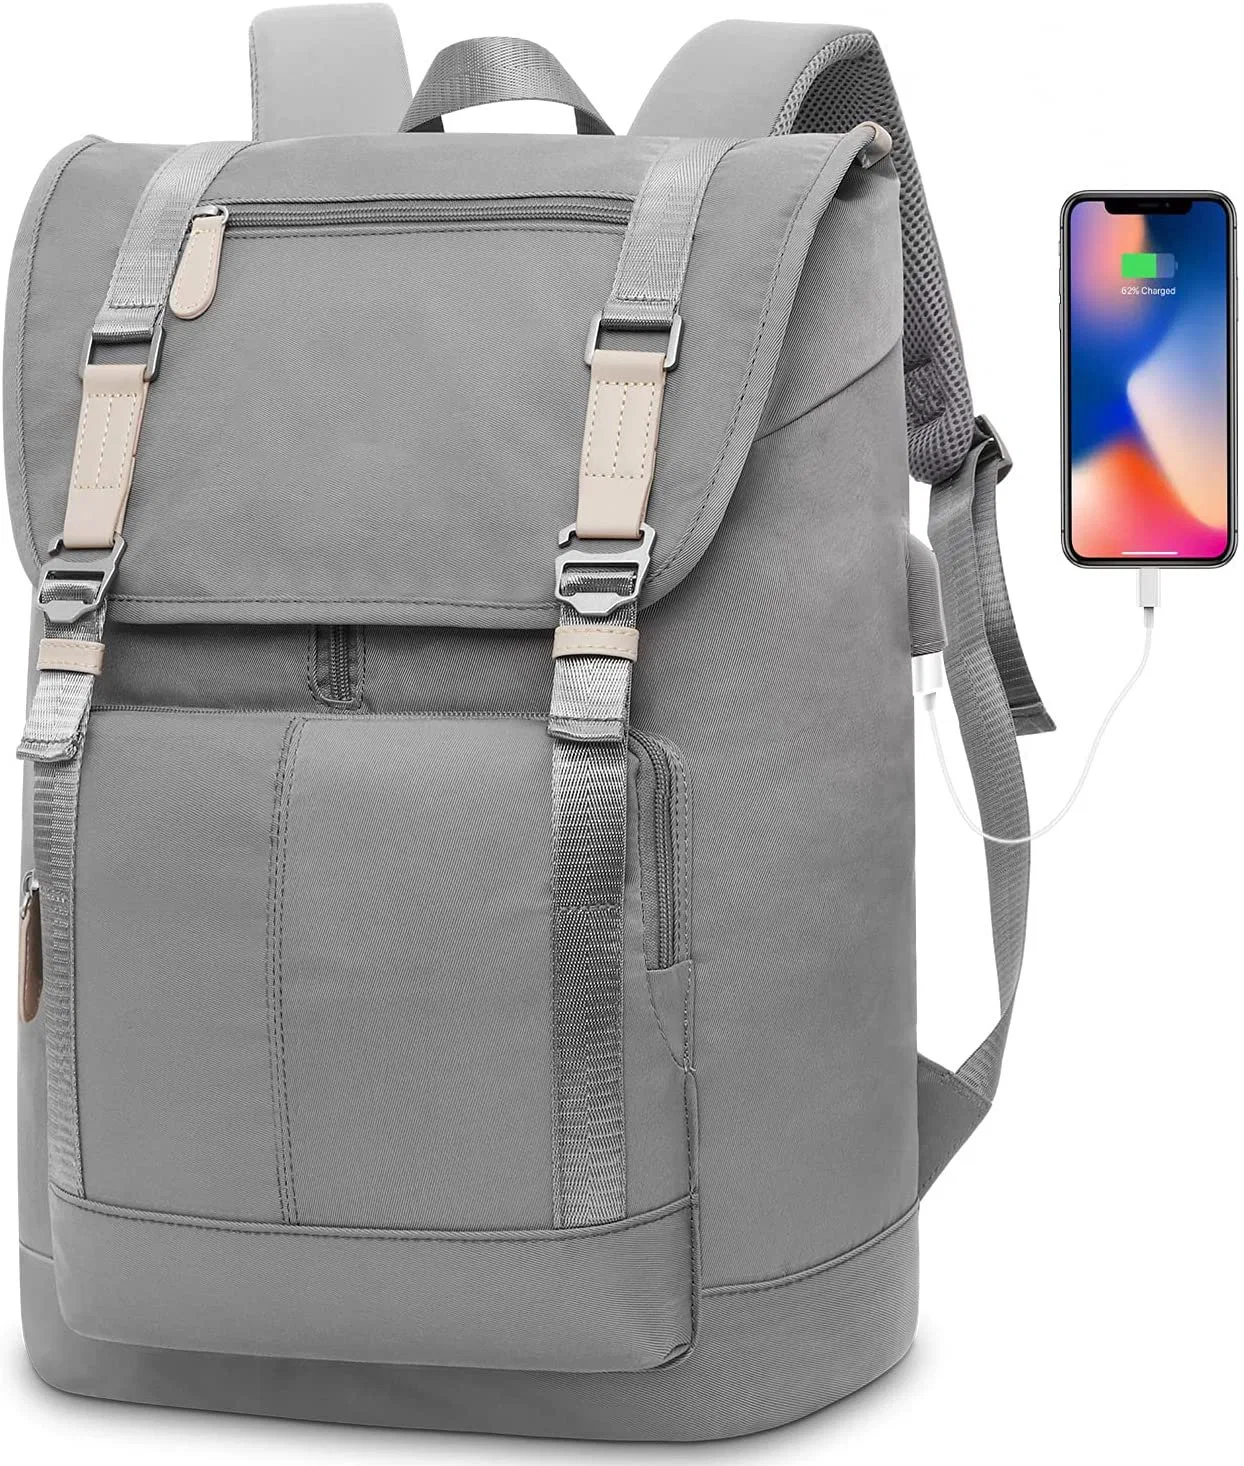 17 Inch Laptop Backpack with USB Charging Port, School Backpack